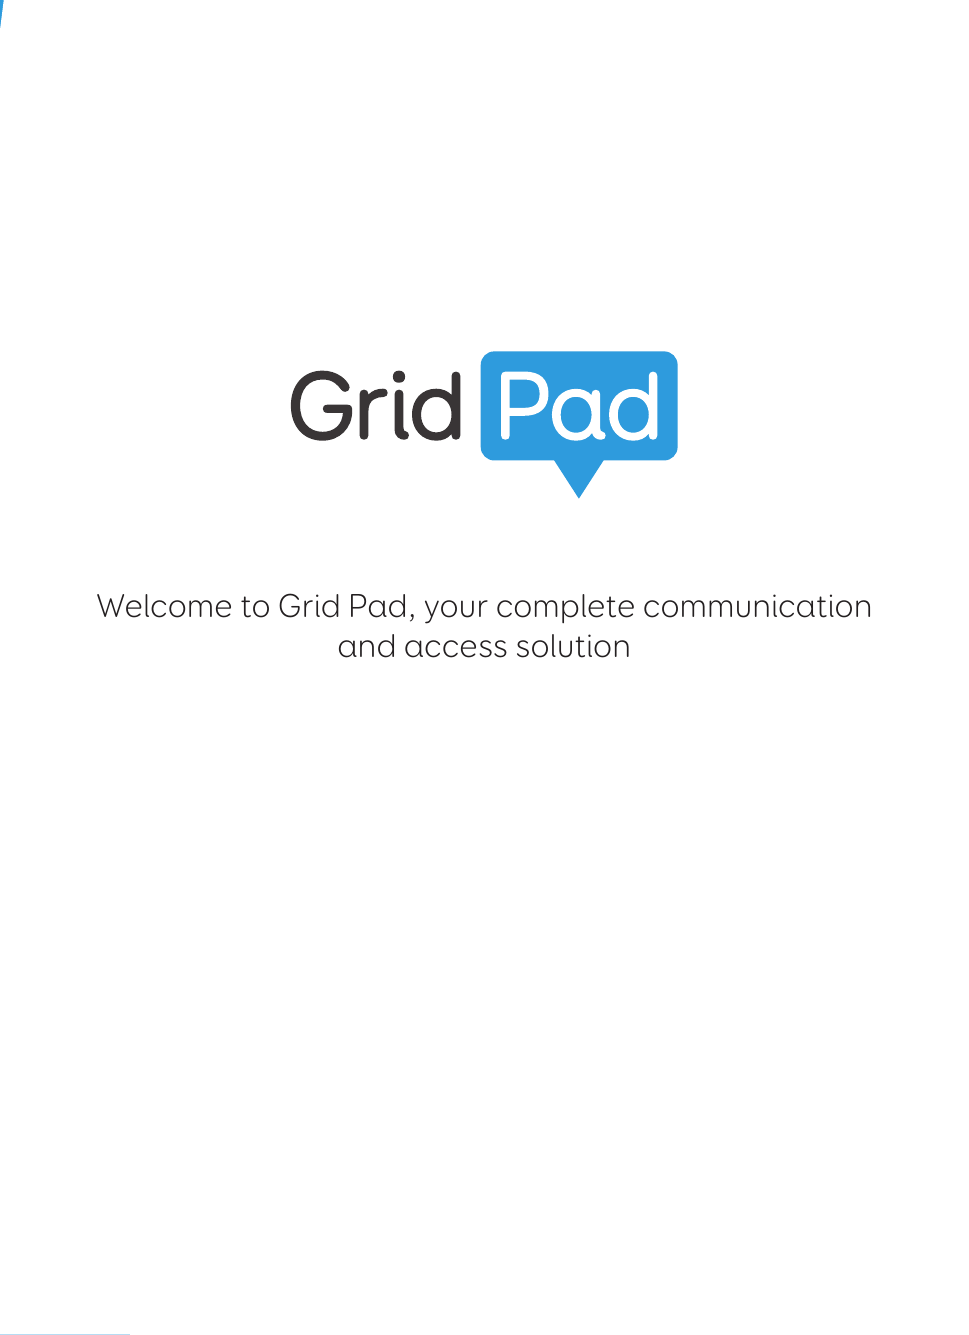 Welcome to Grid Pad, your complete communication and access solution